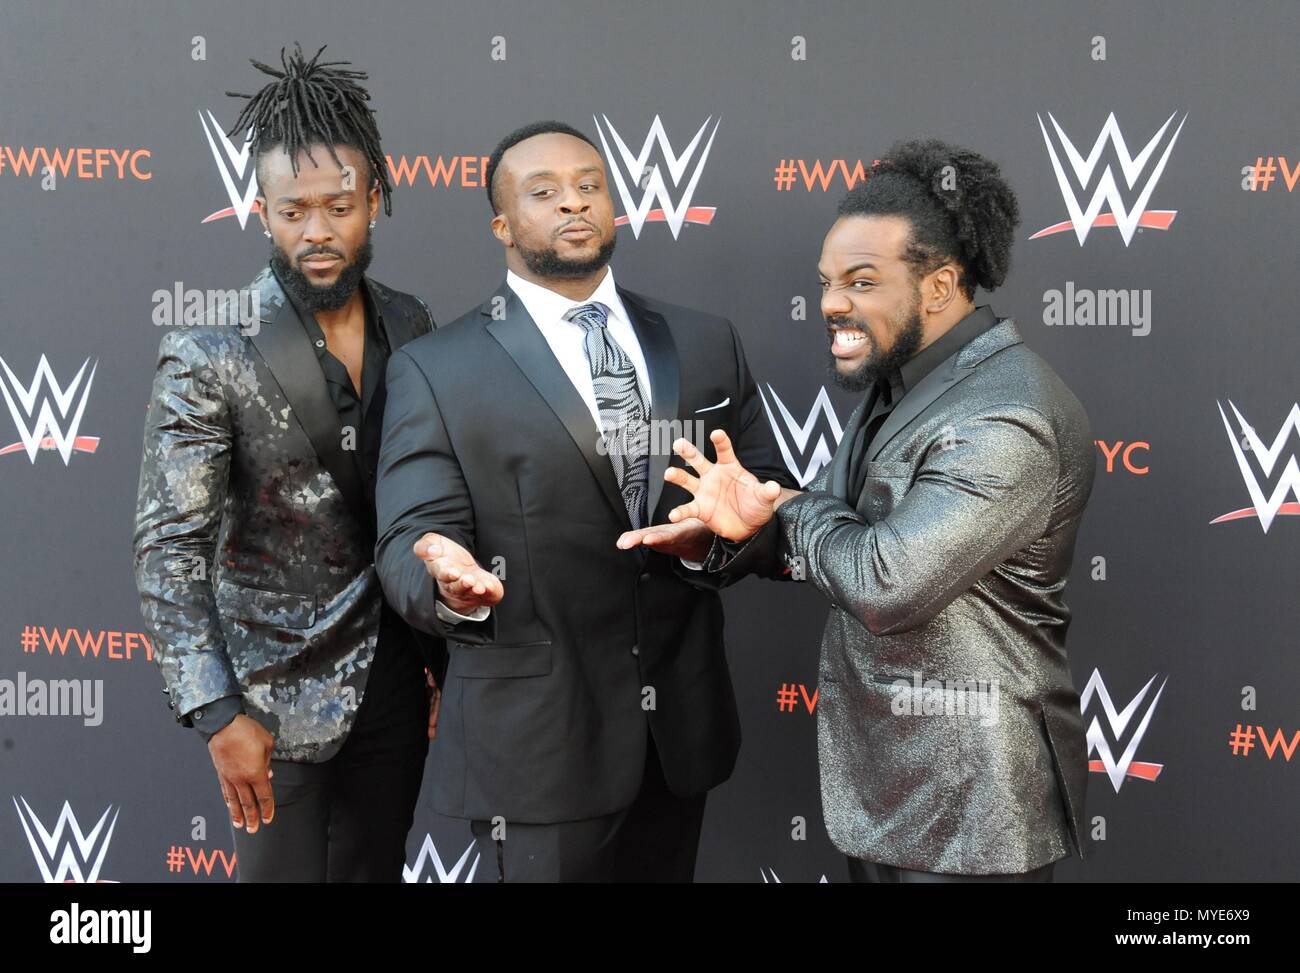 North Hollywood, CA. 6th June, 2018. Kofi Kingston, Big E, Xavier Woods at arrivals for World Wrestling Entertainment WWE FYC Event, Saban Media Center at the Television Academy, North Hollywood, CA June 6, 2018. Credit: Dee Cercone/Everett Collection/Alamy Live News Stock Photo